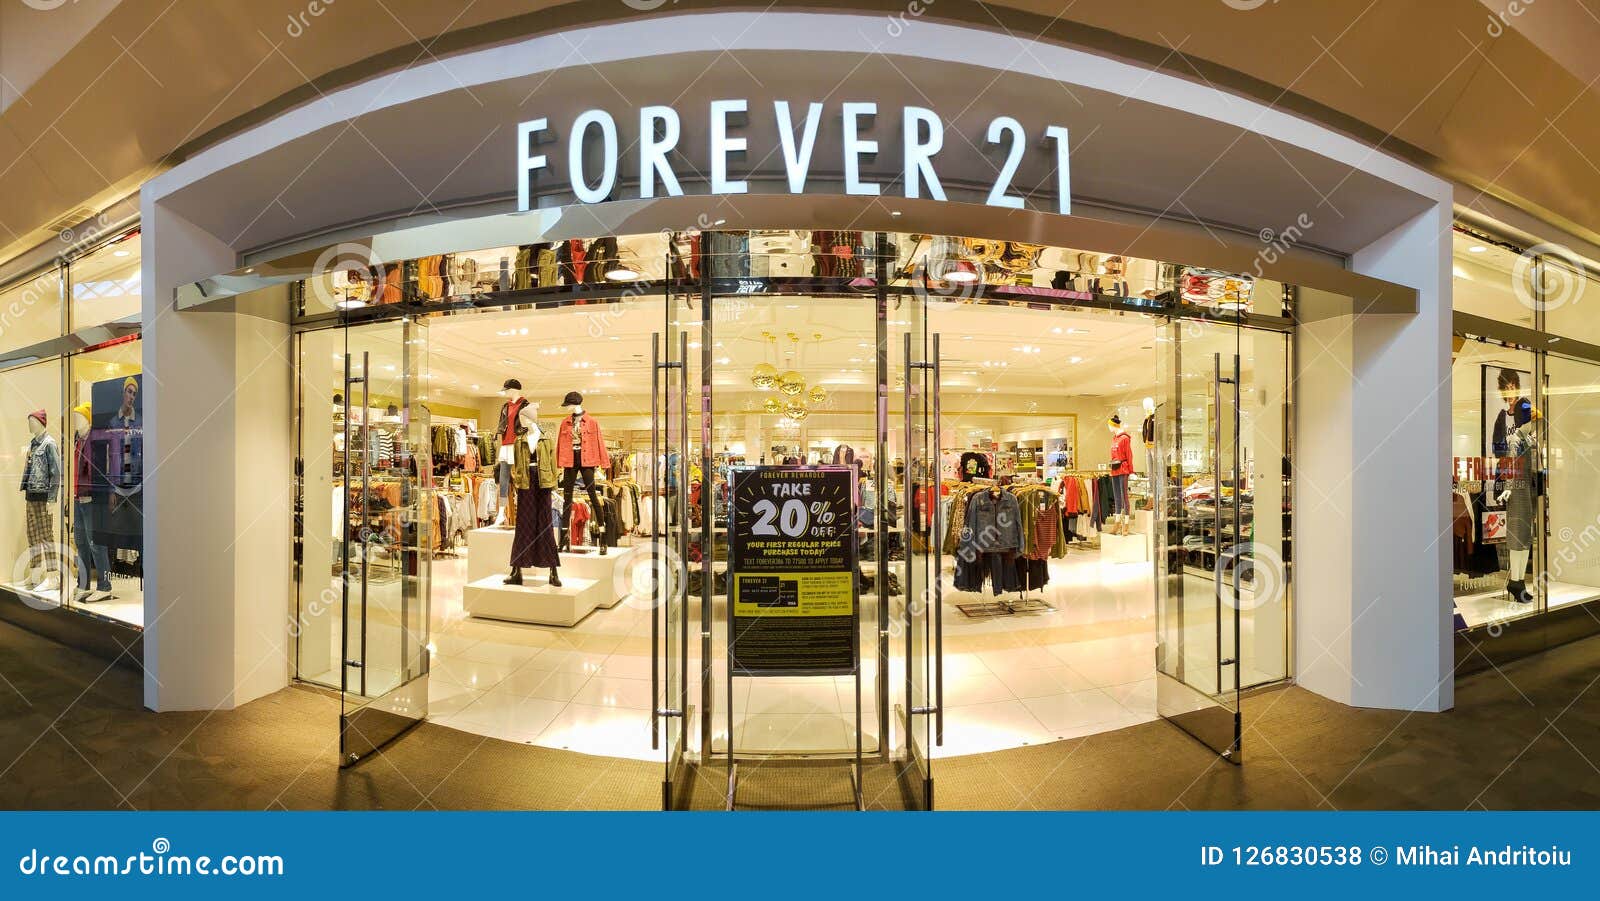 Panoramic View of a Forever 21 Store Front Editorial Stock Photo ...